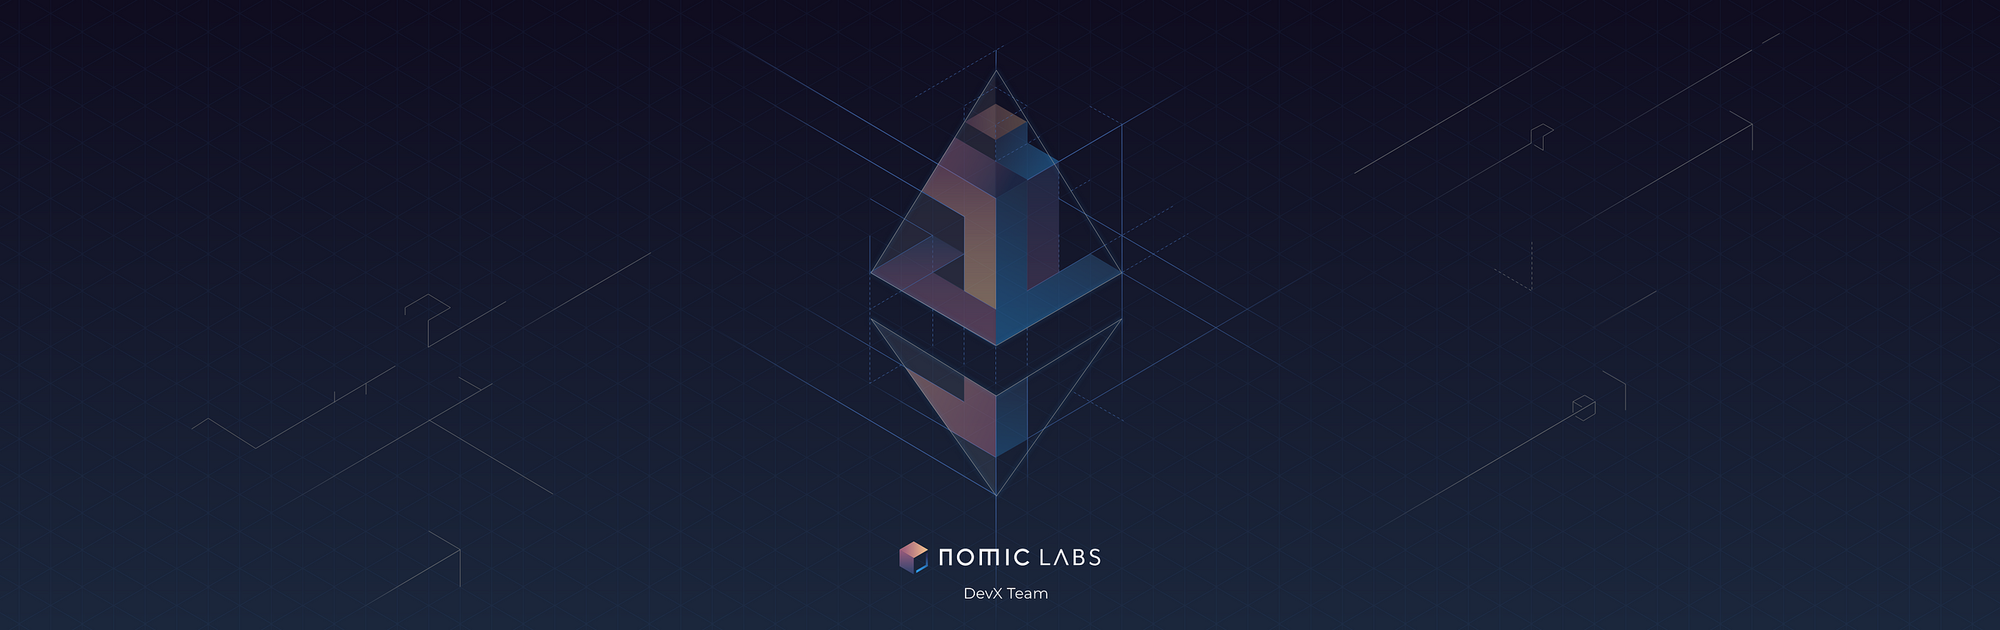 Nomic Labs DevX: Prioritizing projects